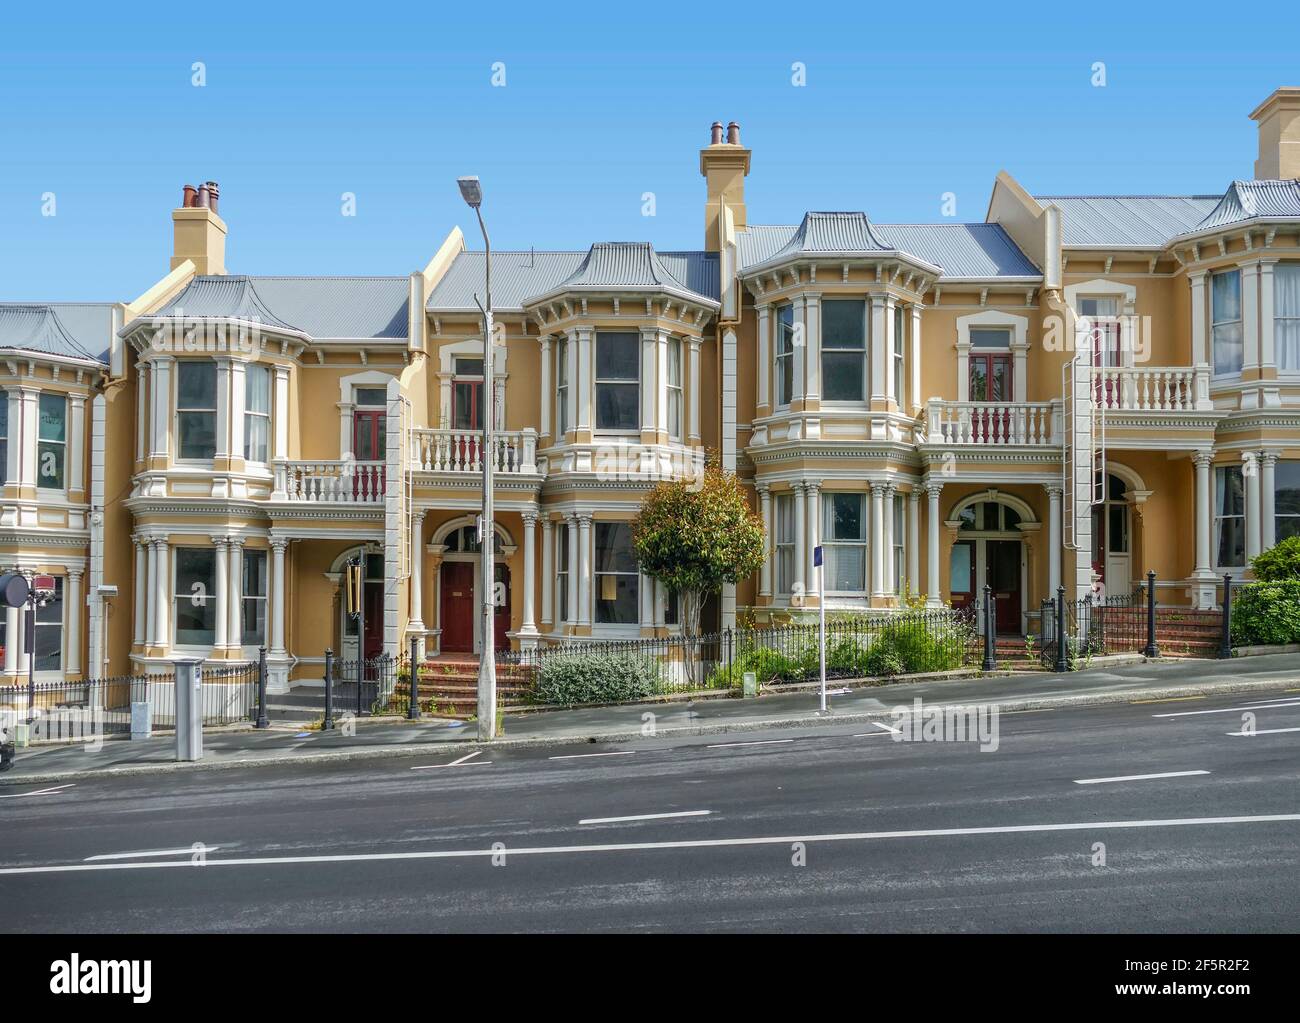 roadside scenery including some houses in Dunedin, a city at the South Island of New Zealand Stock Photo